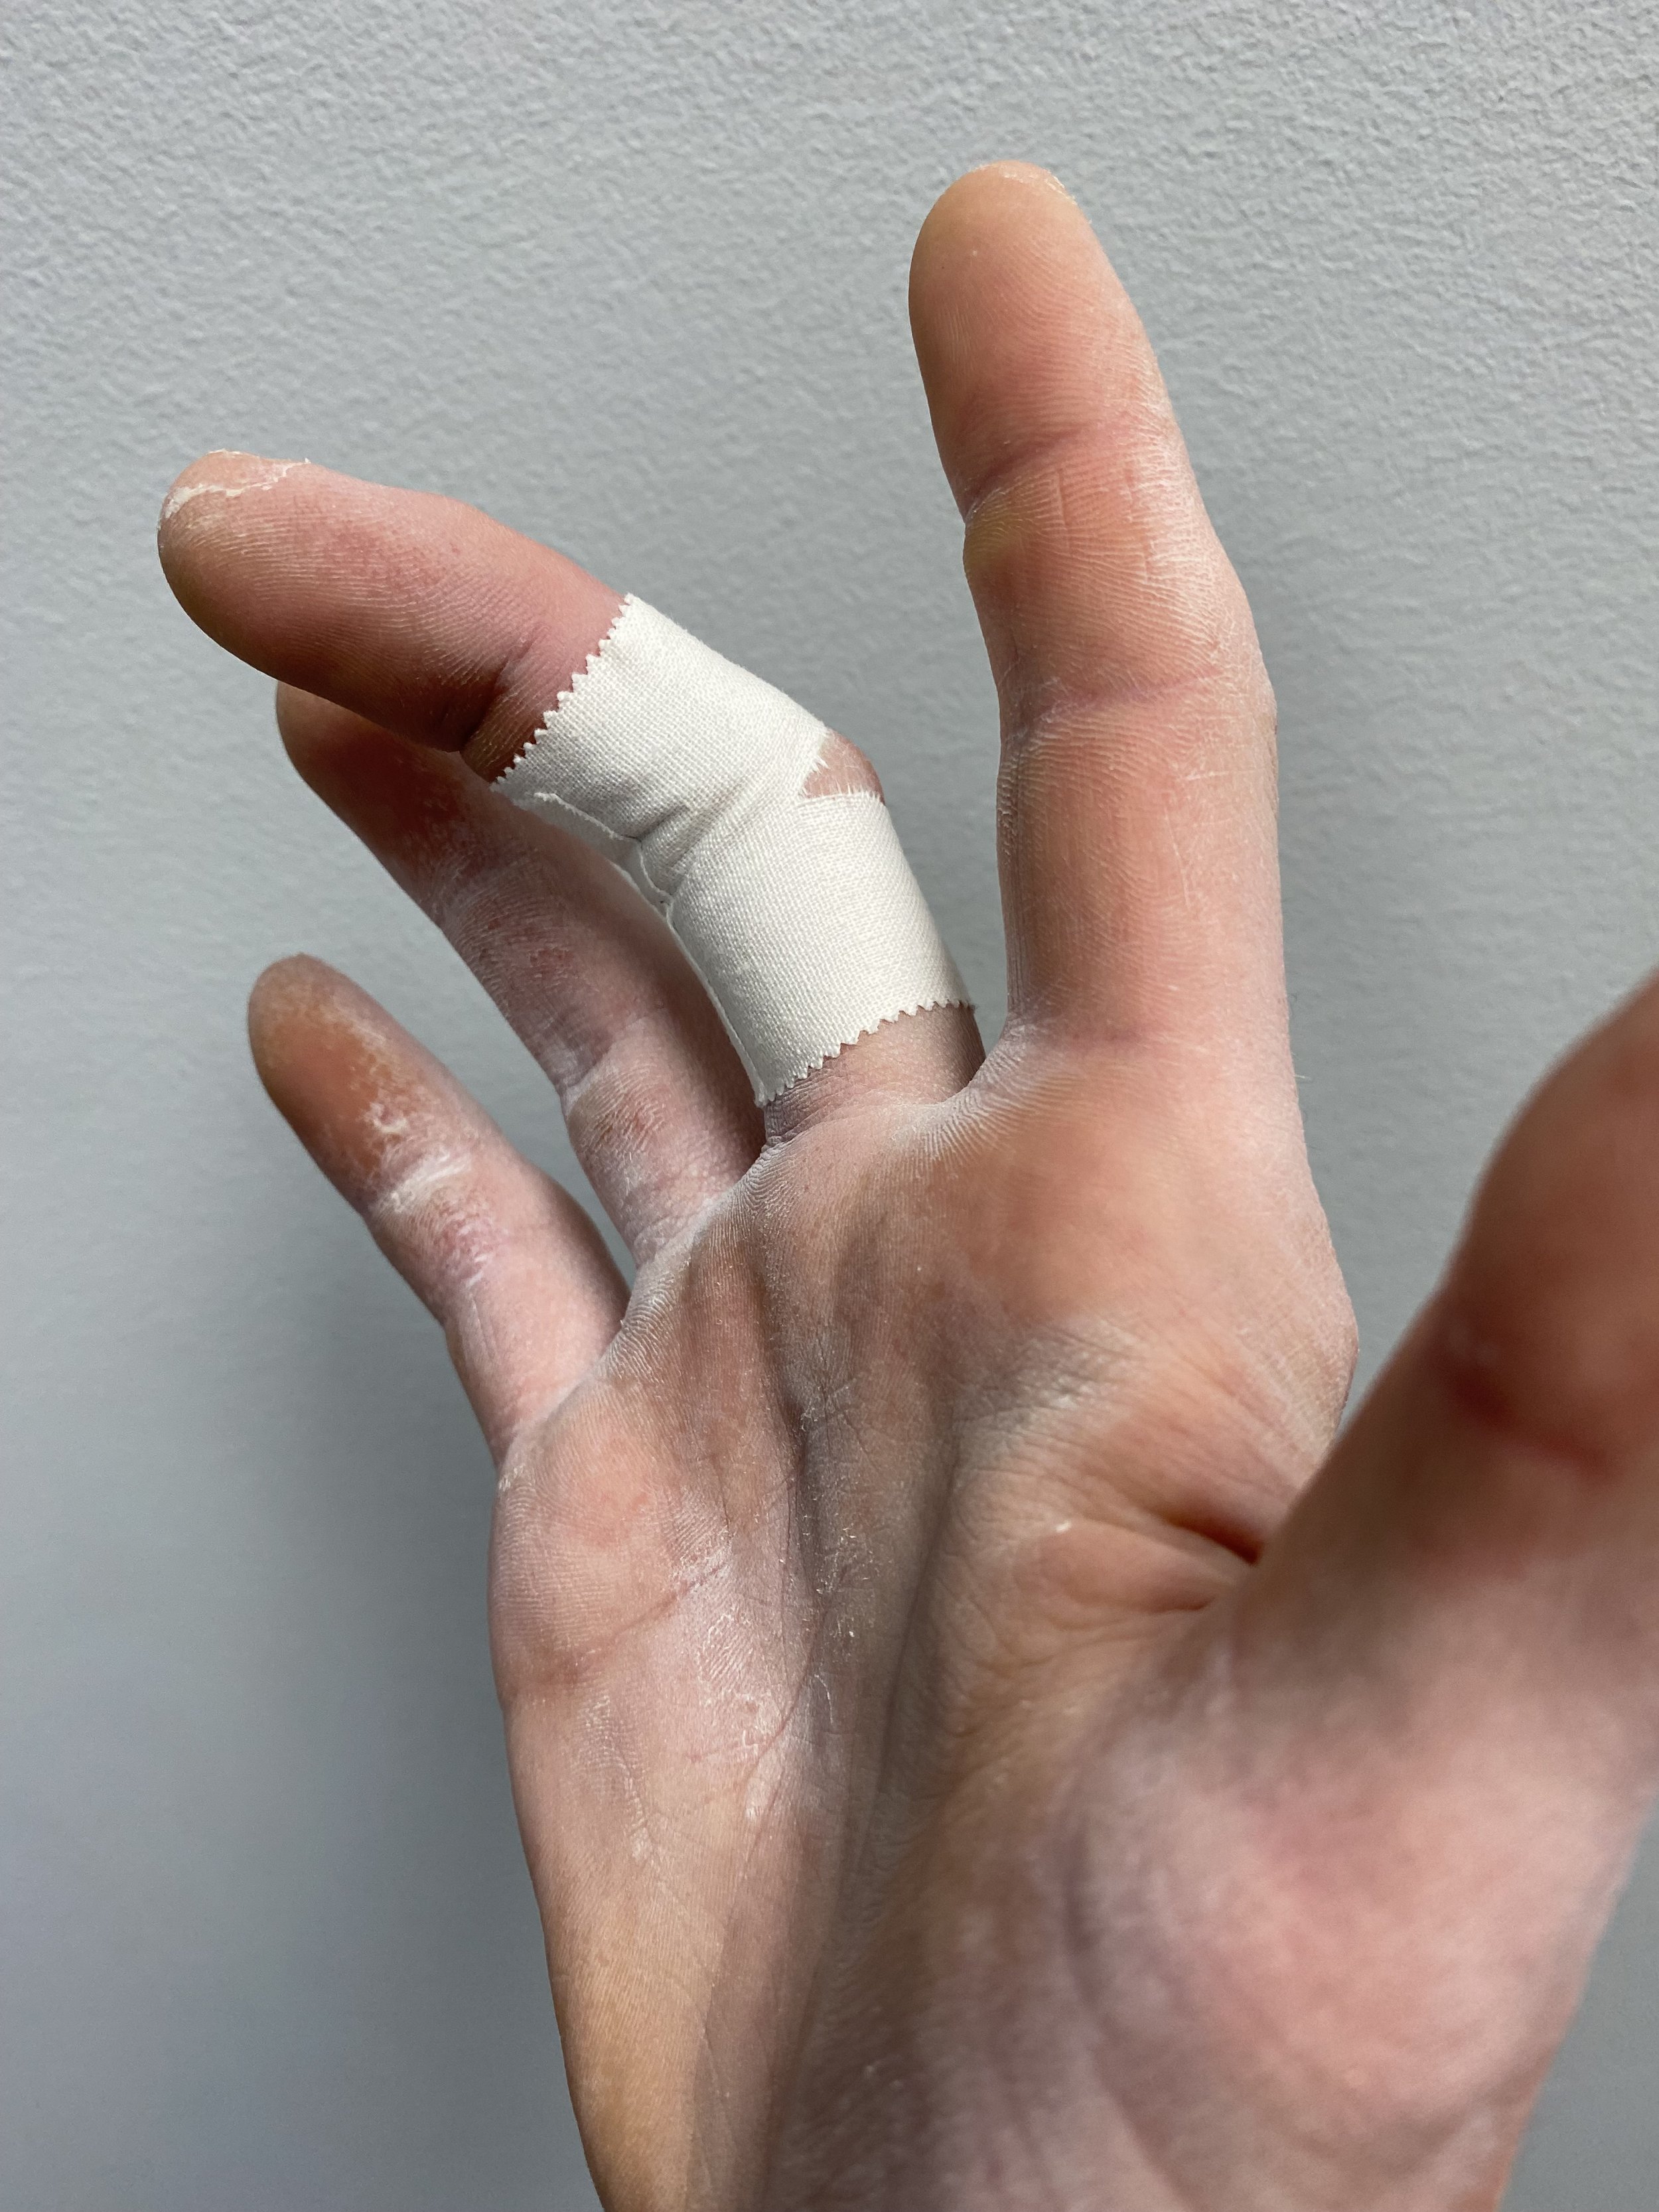 Does Finger Taping Improve Finger Strength In Climbers? - Mend